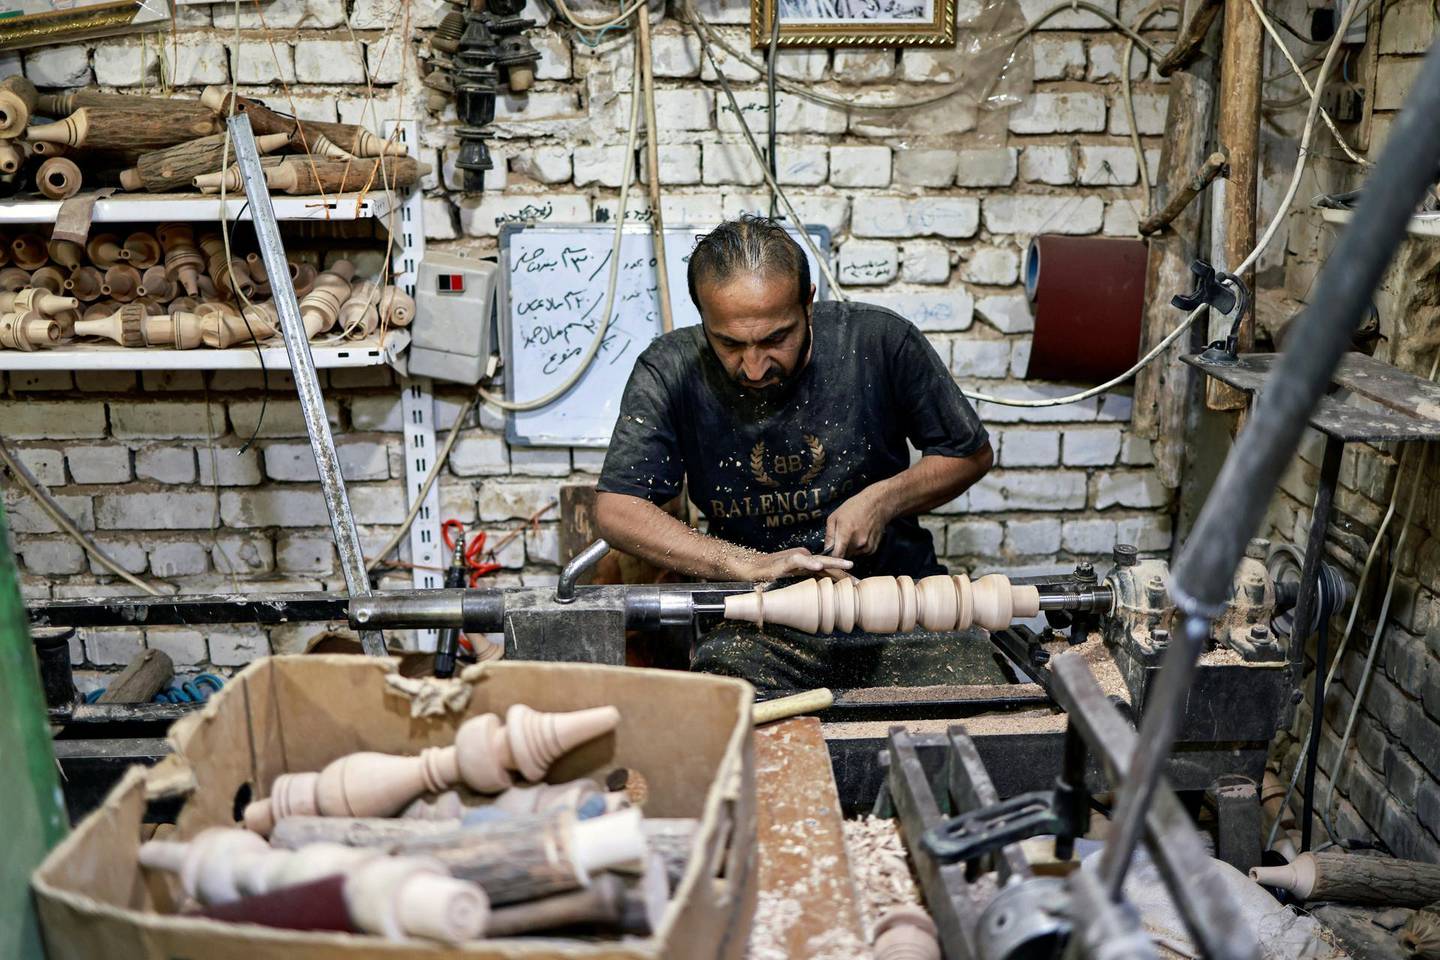 A worker makes a hookah, traditionally water-pipe made out of wood, in his workshop in Kerbala, Iraq, June 11, 2021. Picture taken June 11, 2021. REUTERS/Abdullah Dhiaa al-Deen